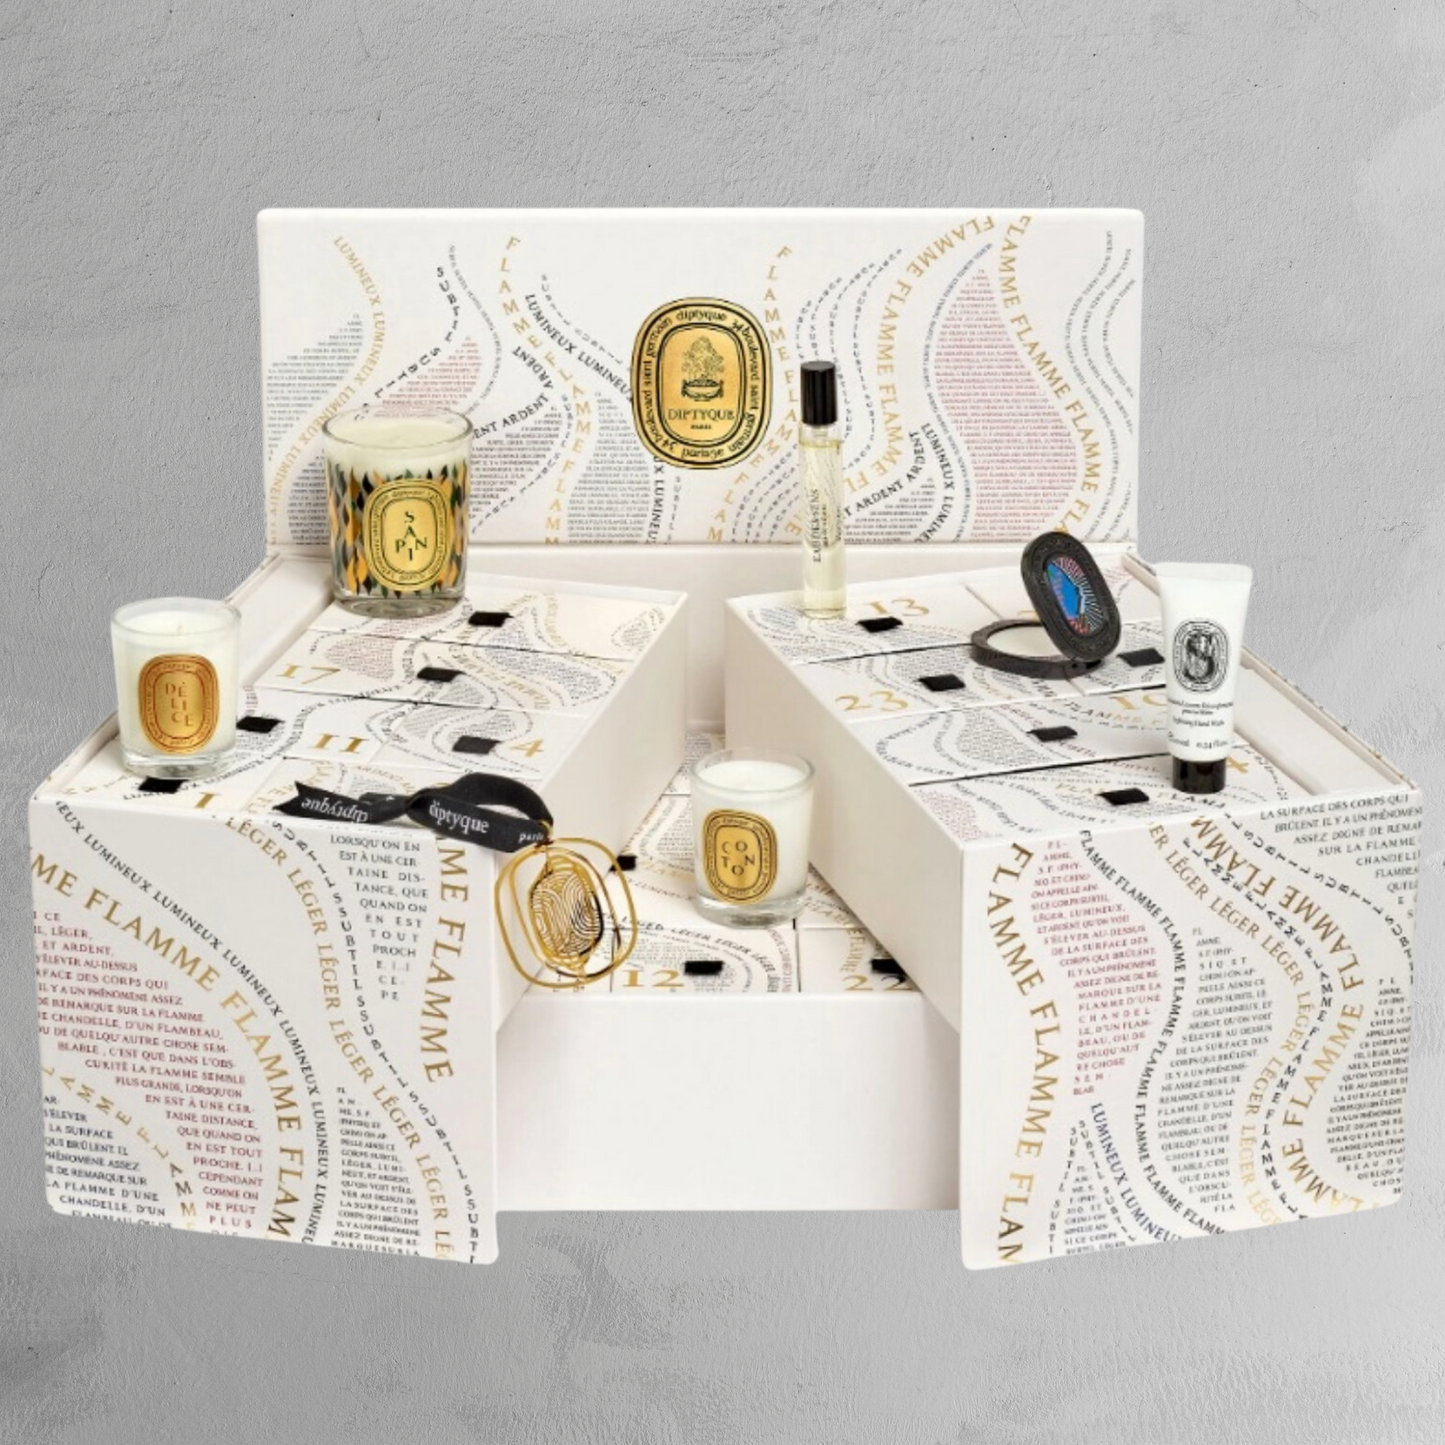 Diptyque - Advent Calendar - 25 Scented Treasures - Limited Edition